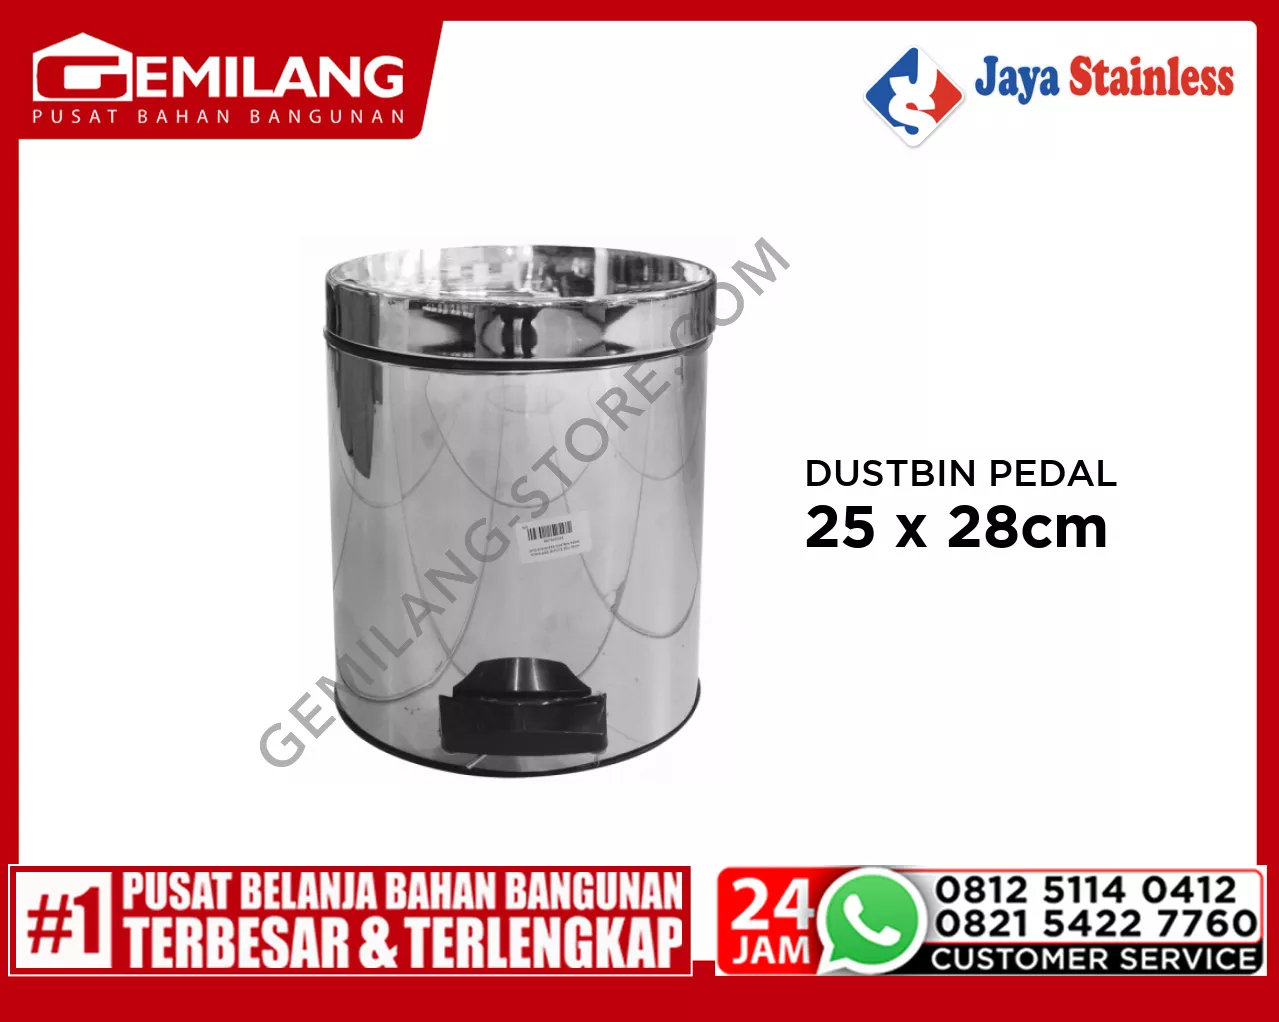 JAYA STAINLESS DUSTBIN PEDAL STAINLESS JS-PD7S 25 x 28cm